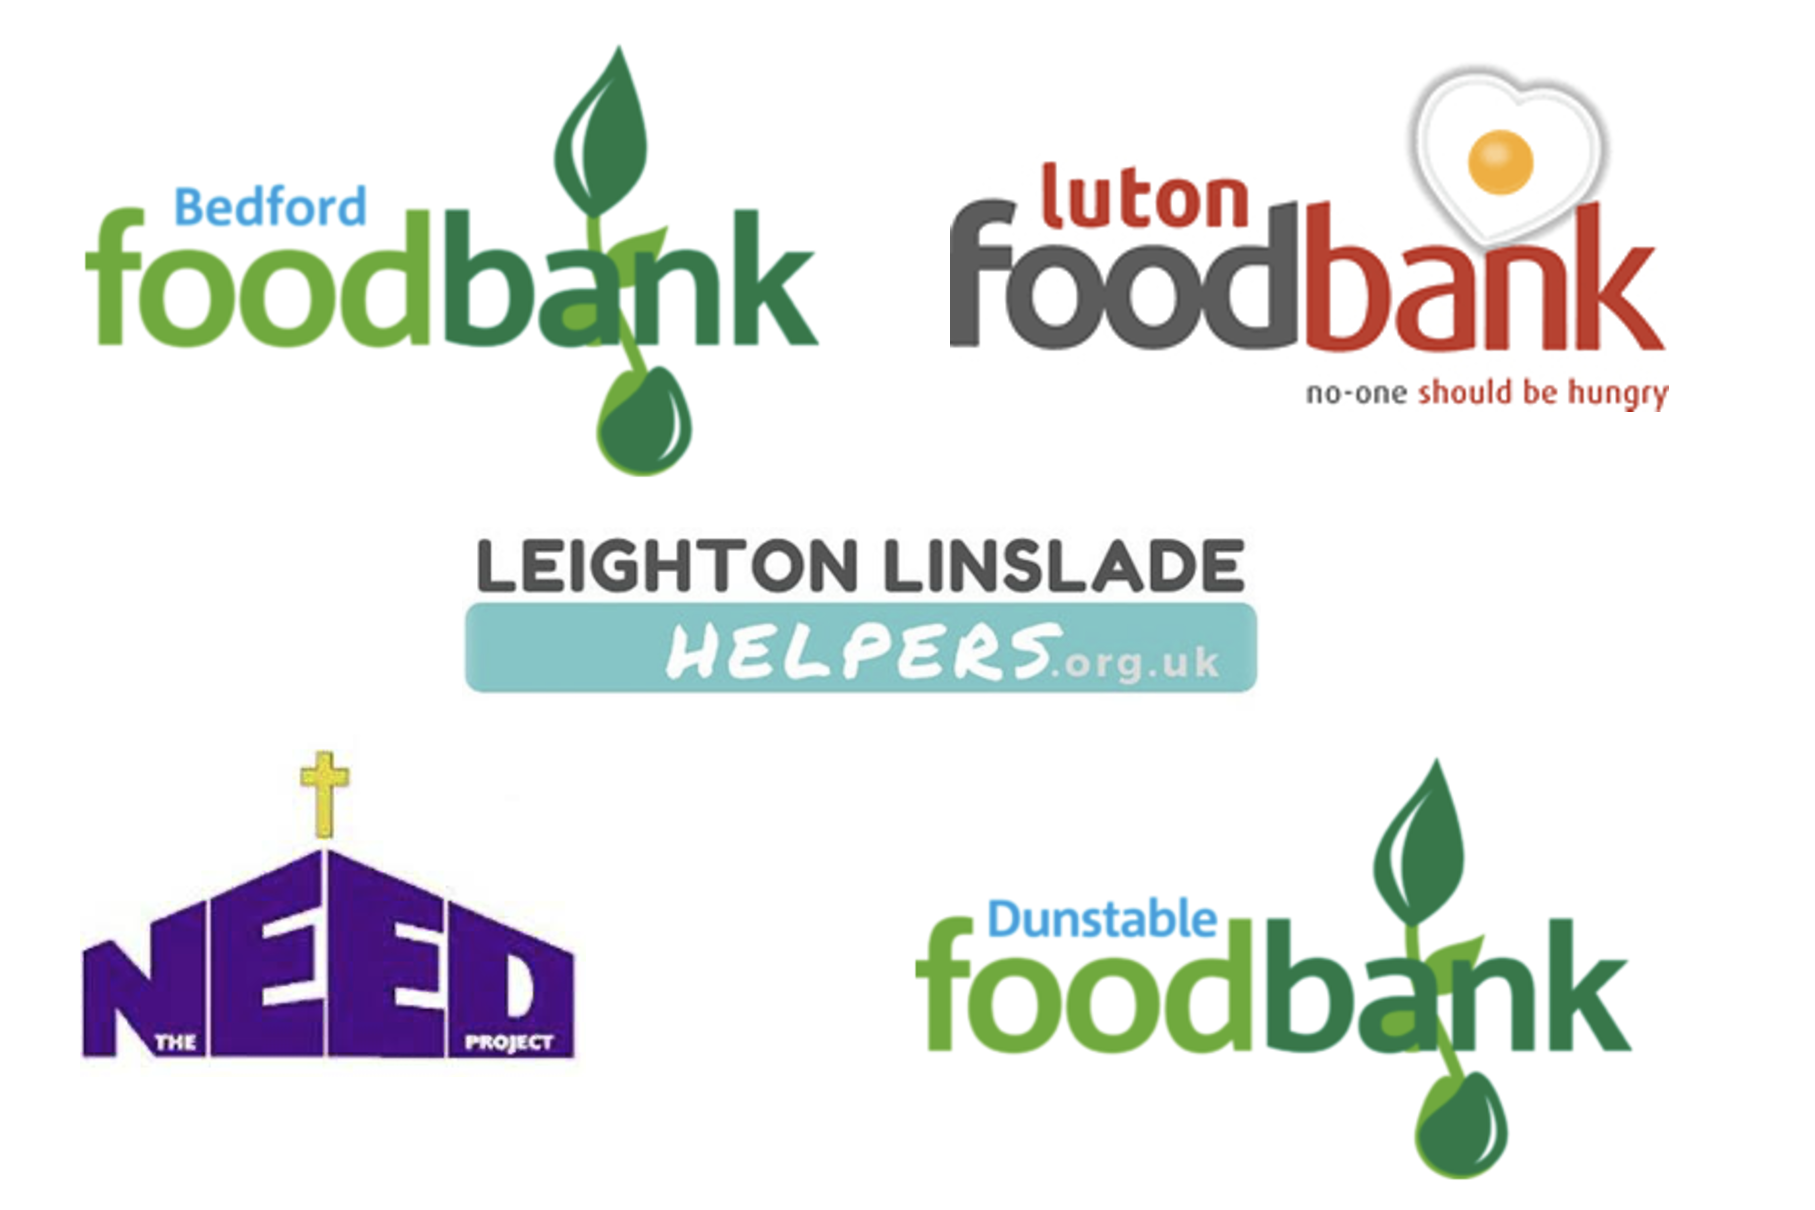 £7,500 for Local Foodbanks